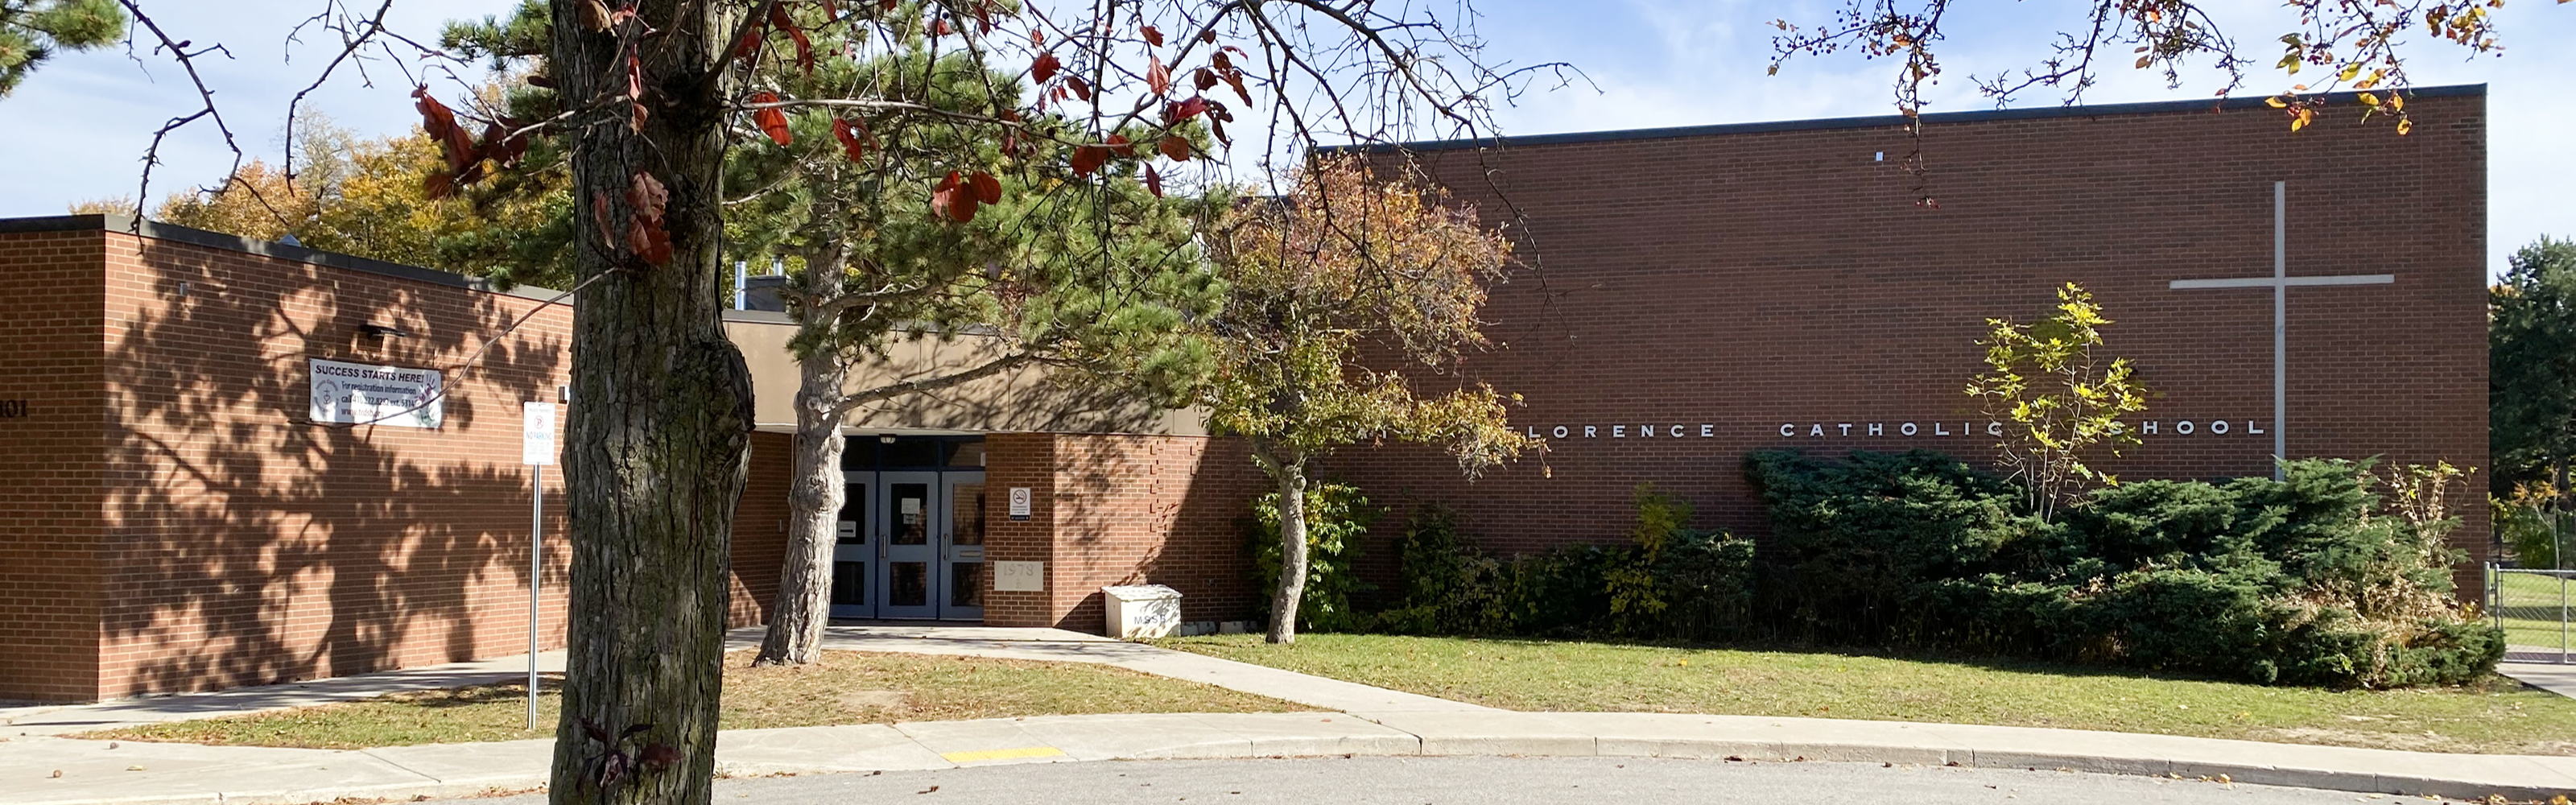 The front of the St. Florence Catholic School building.